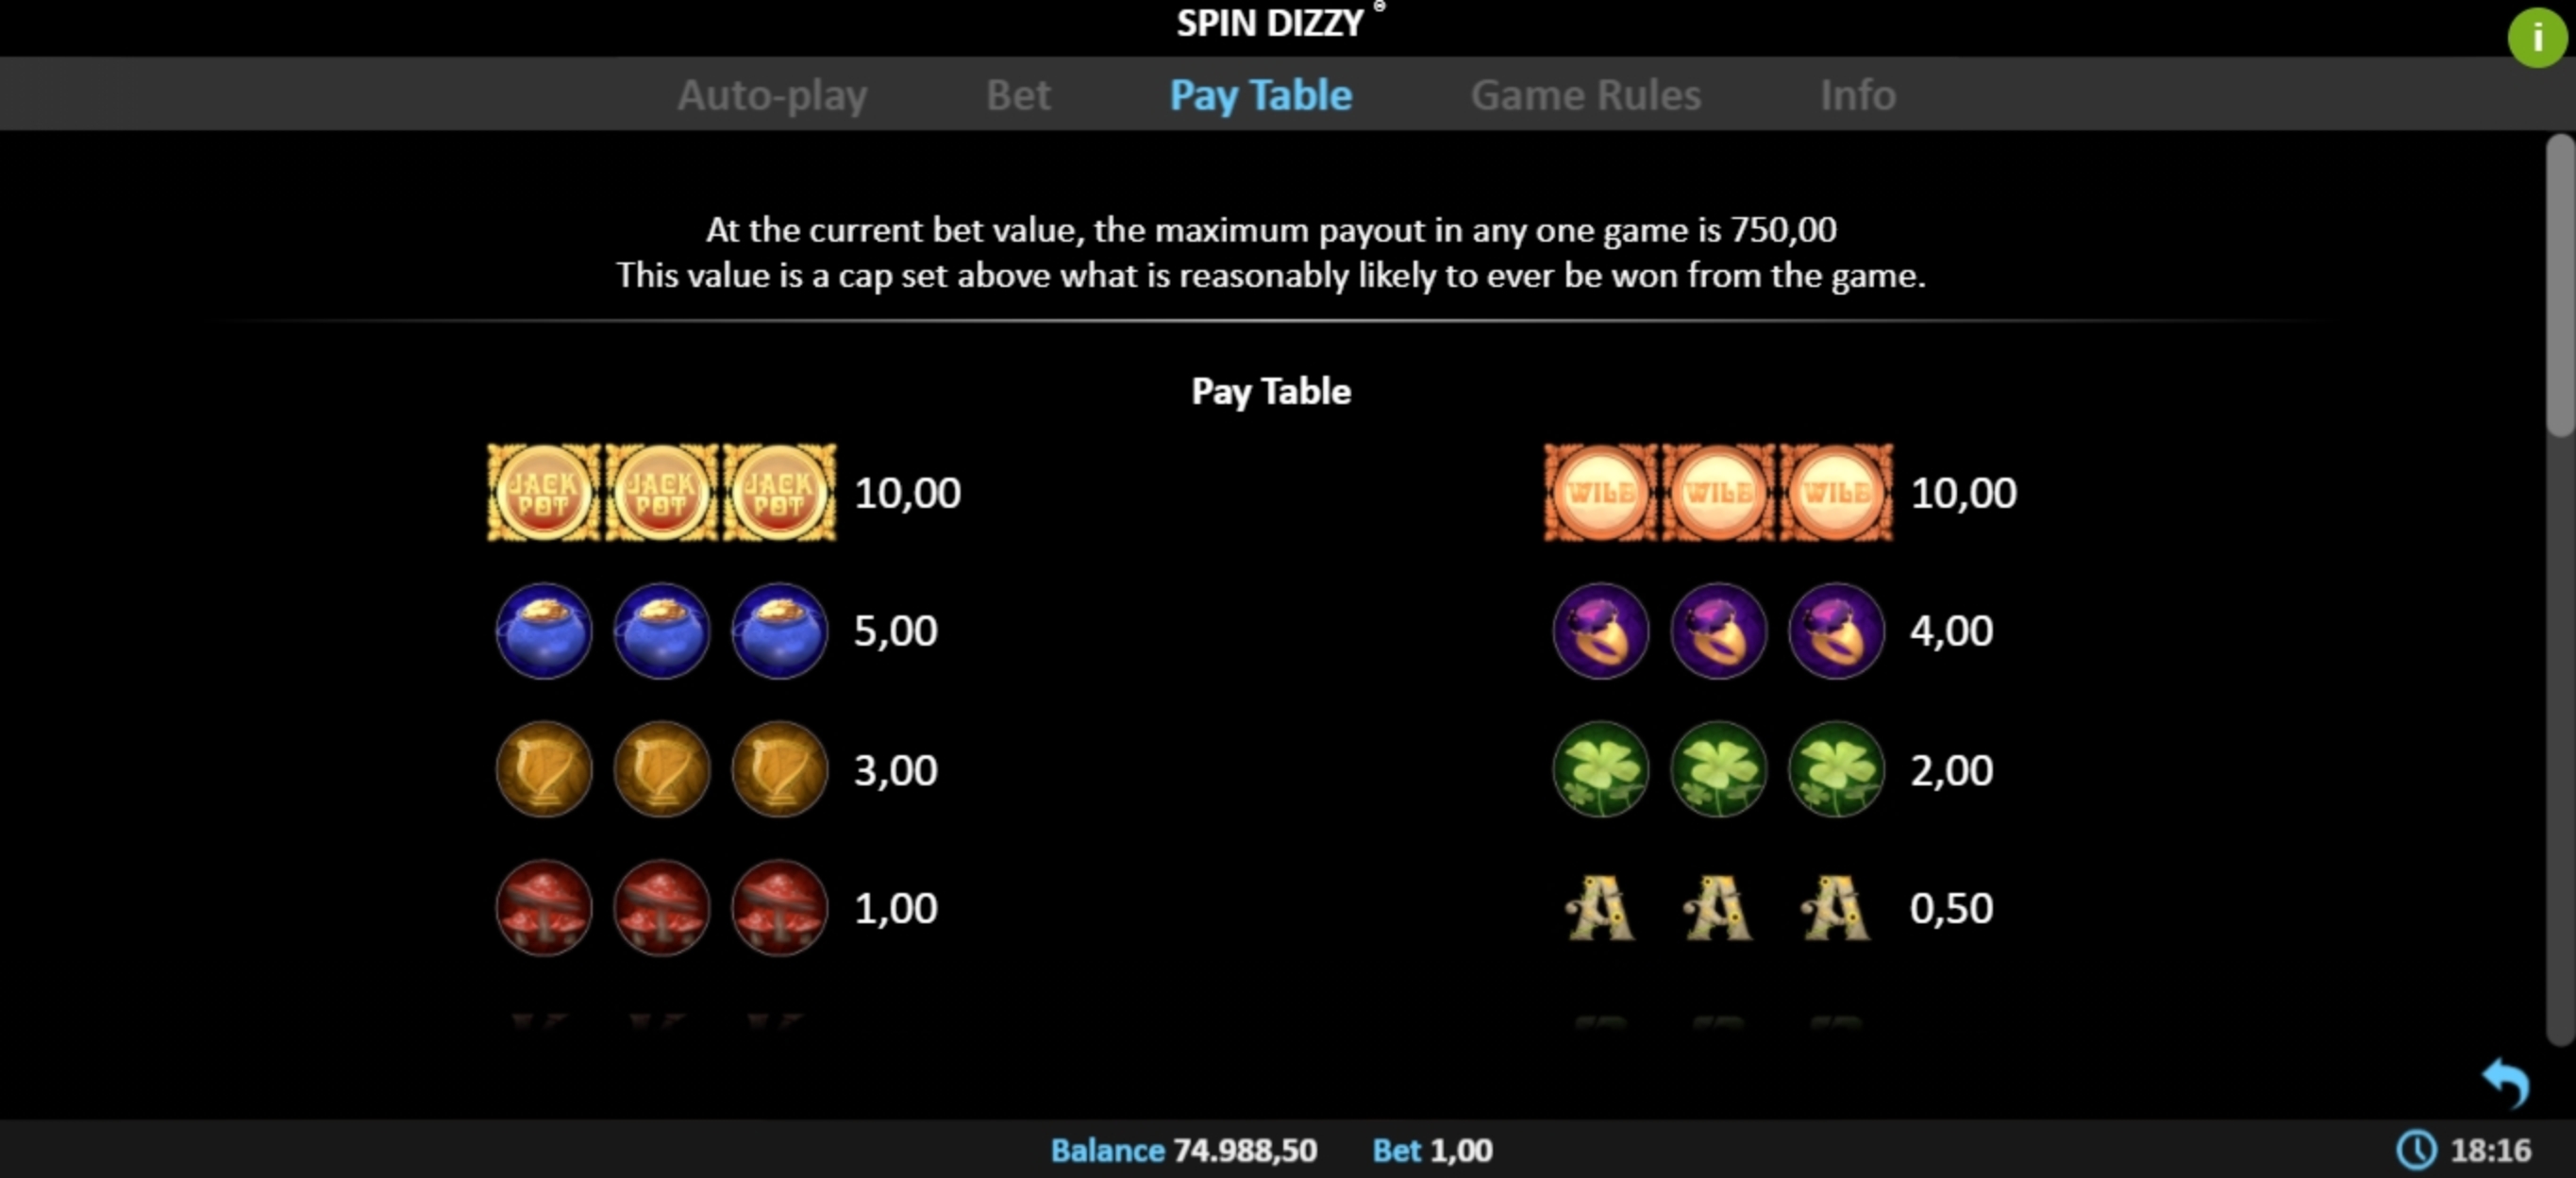 Info of Spin Dizzy Pull Tab Slot Game by Realistic Games